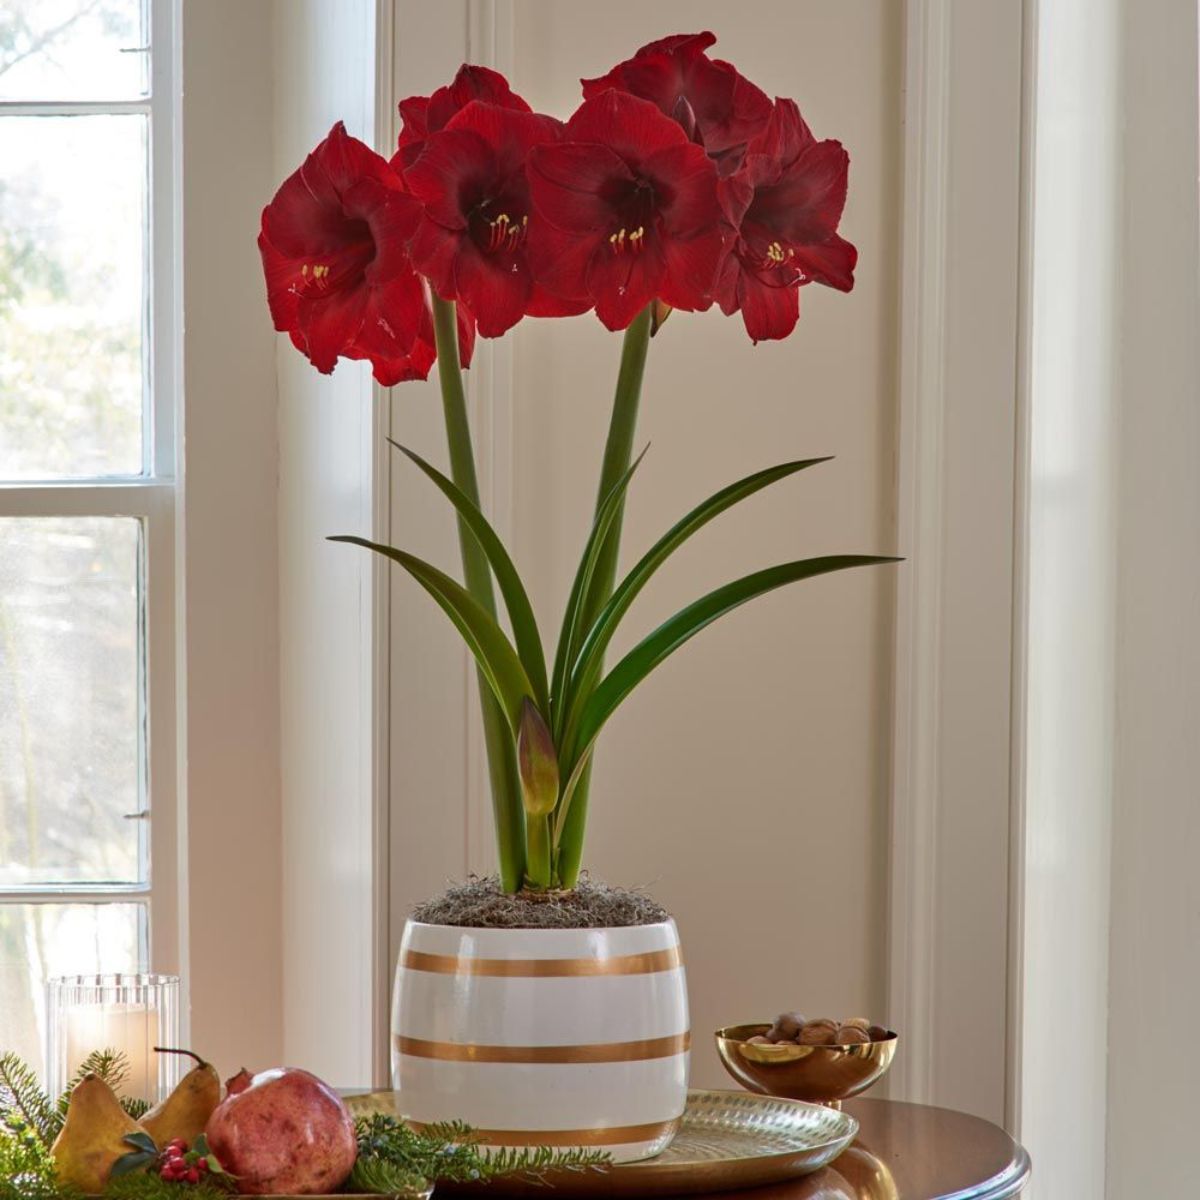 How to care for Amaryllis during winter on Thursd